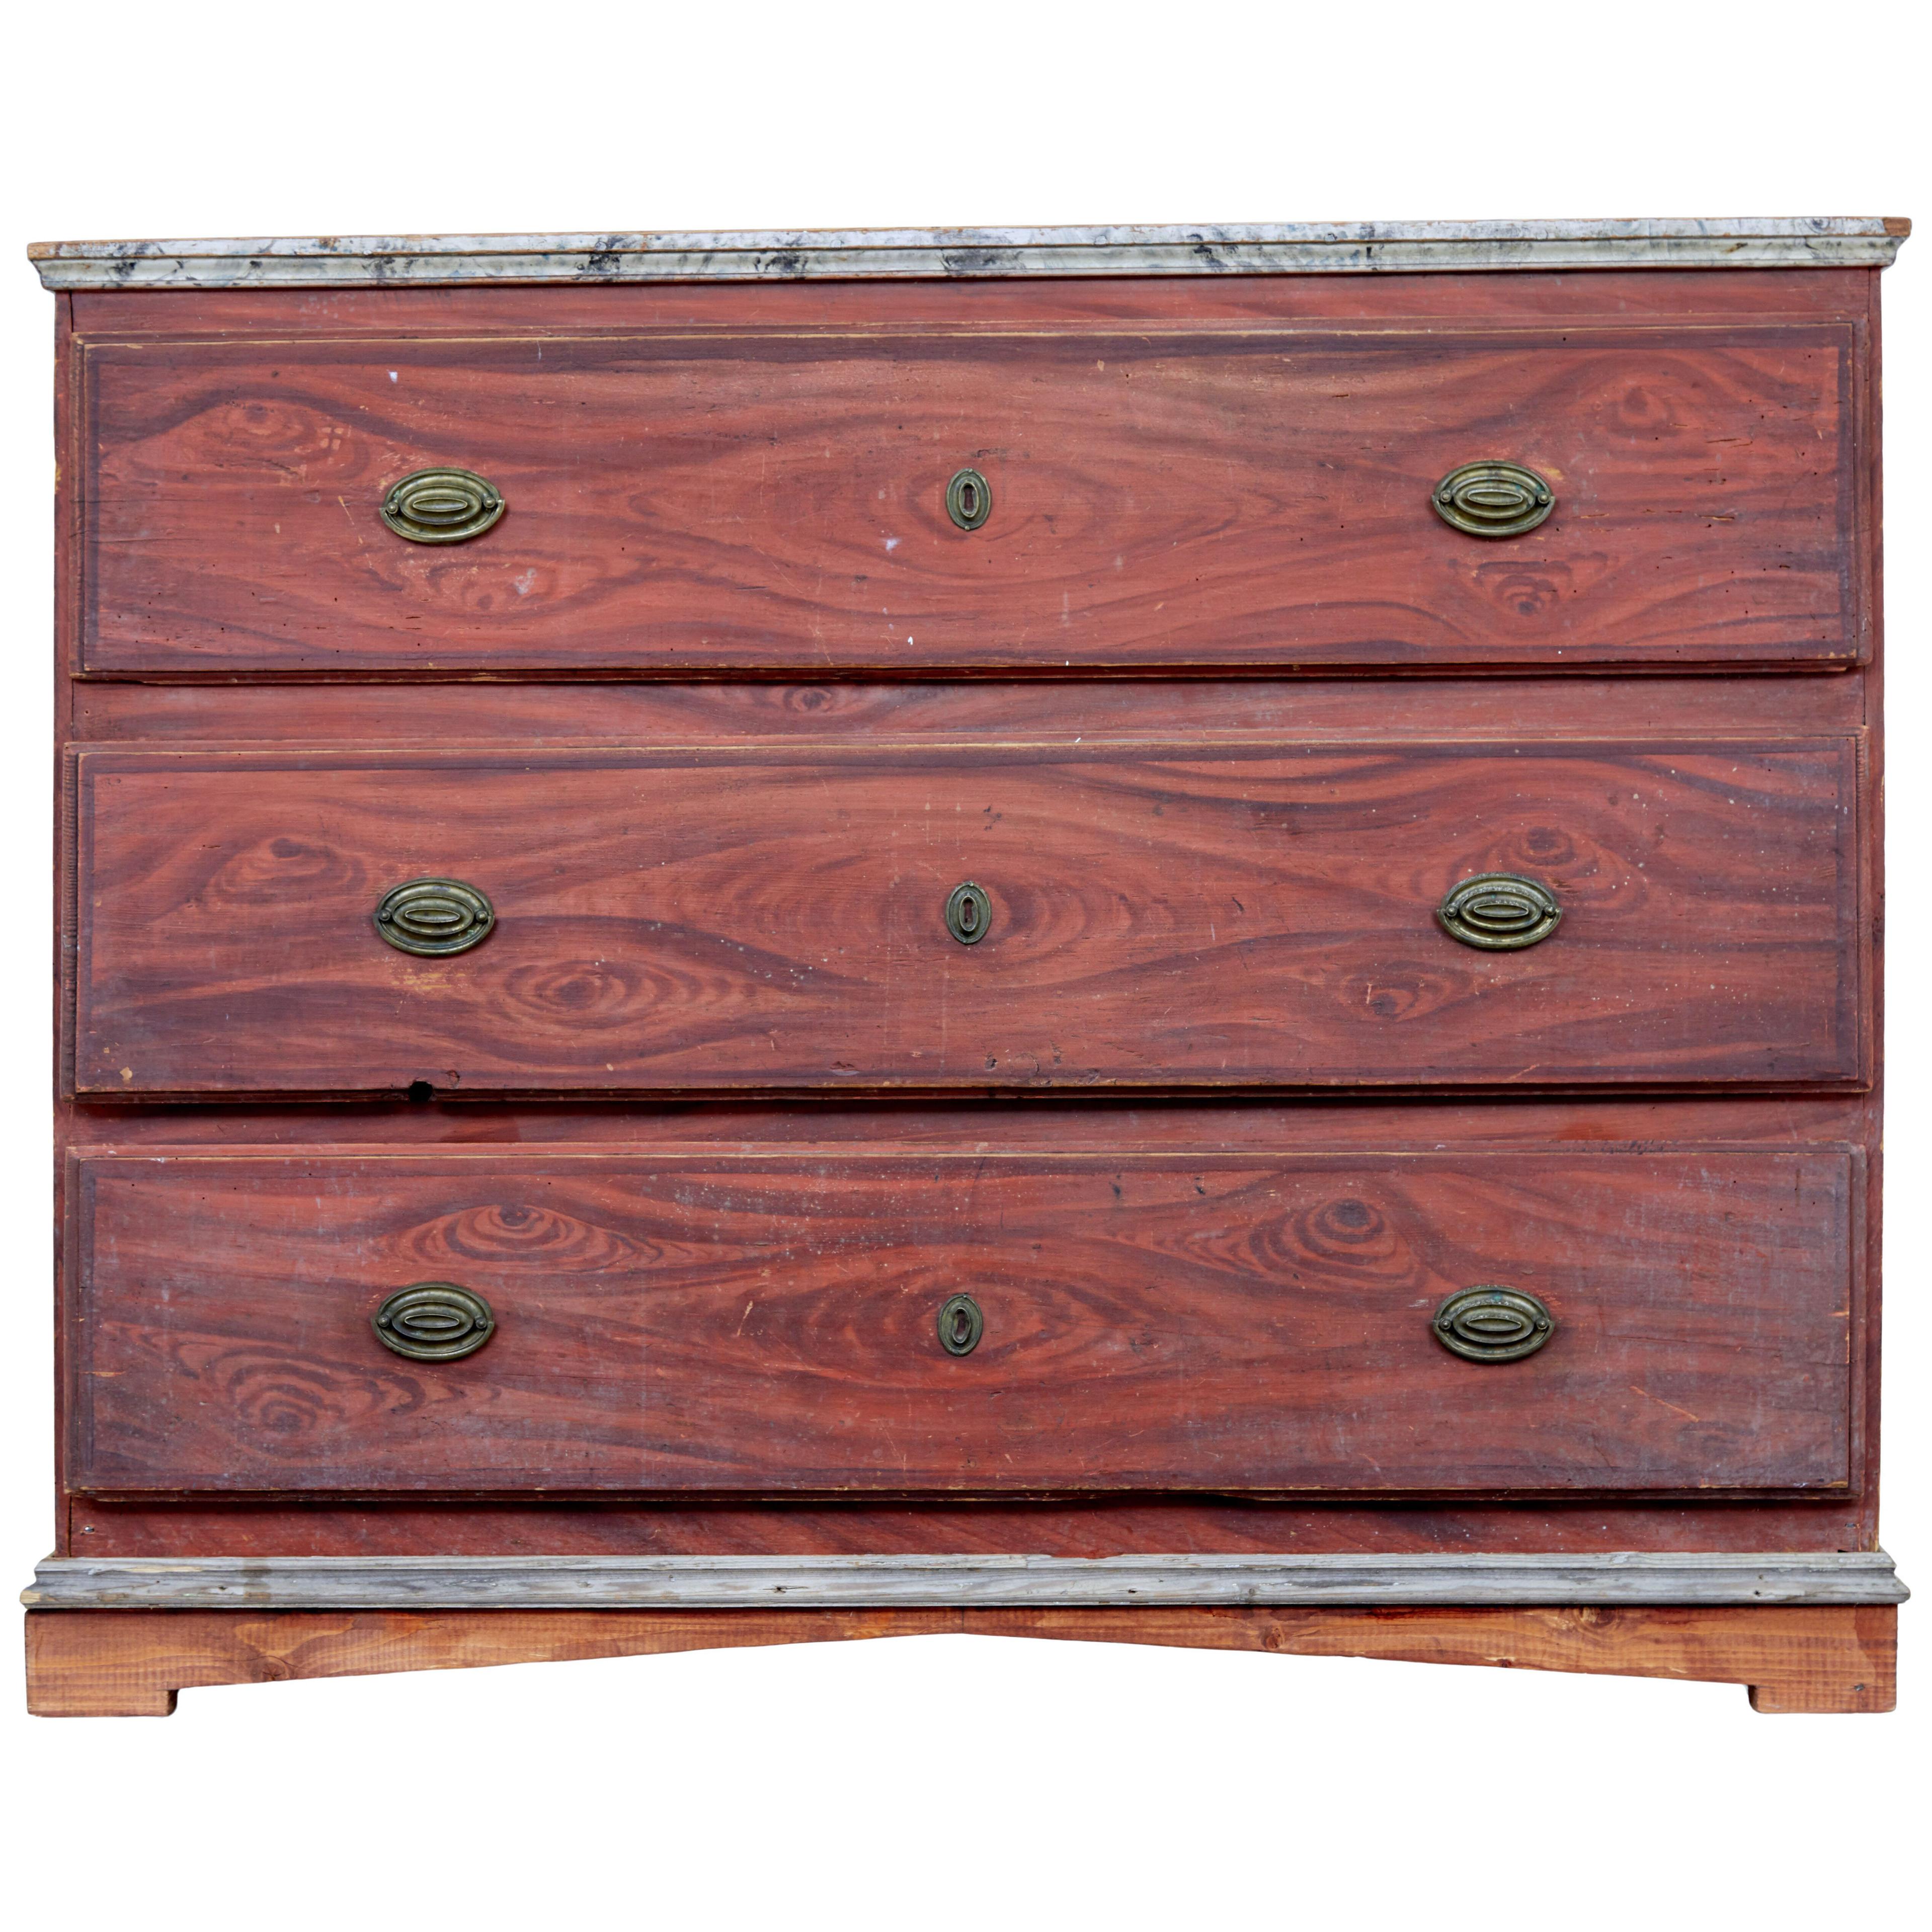 19TH CENTURY HAND PAINTED SWEDISH CHEST OF DRAWERS